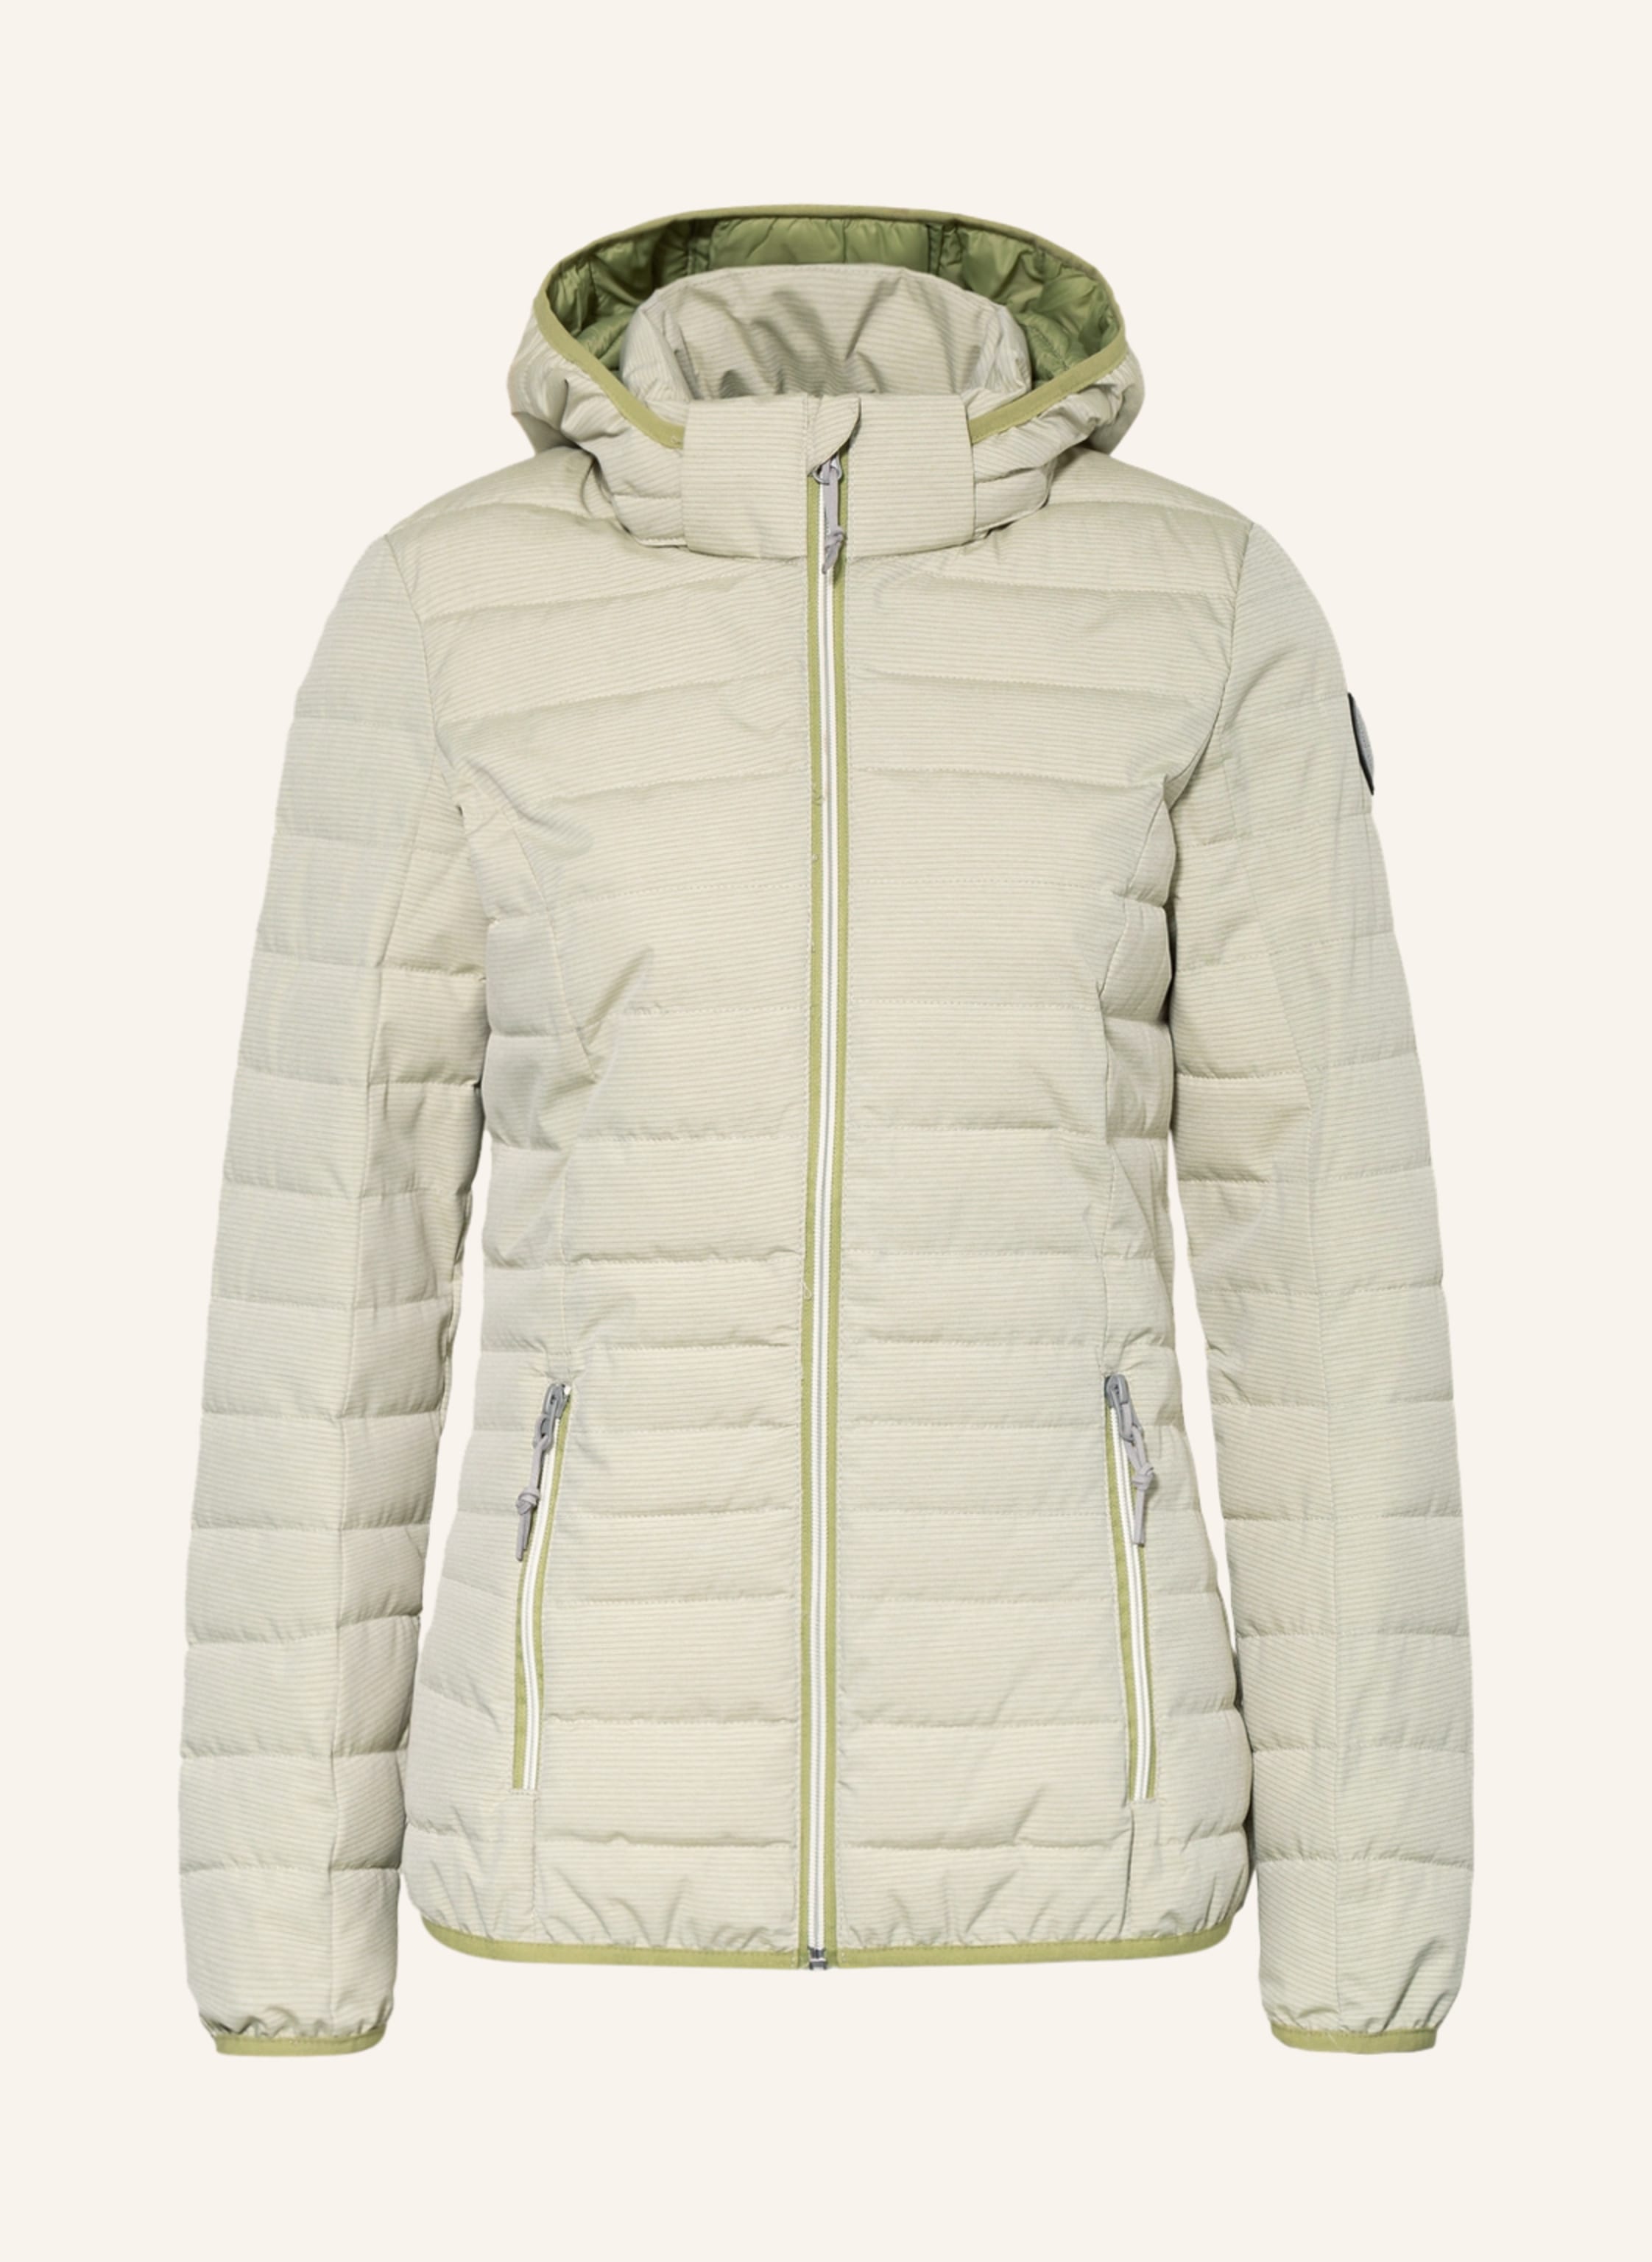 G.I.G.A. DX by killtec Quilted jacket UYAKA in light green